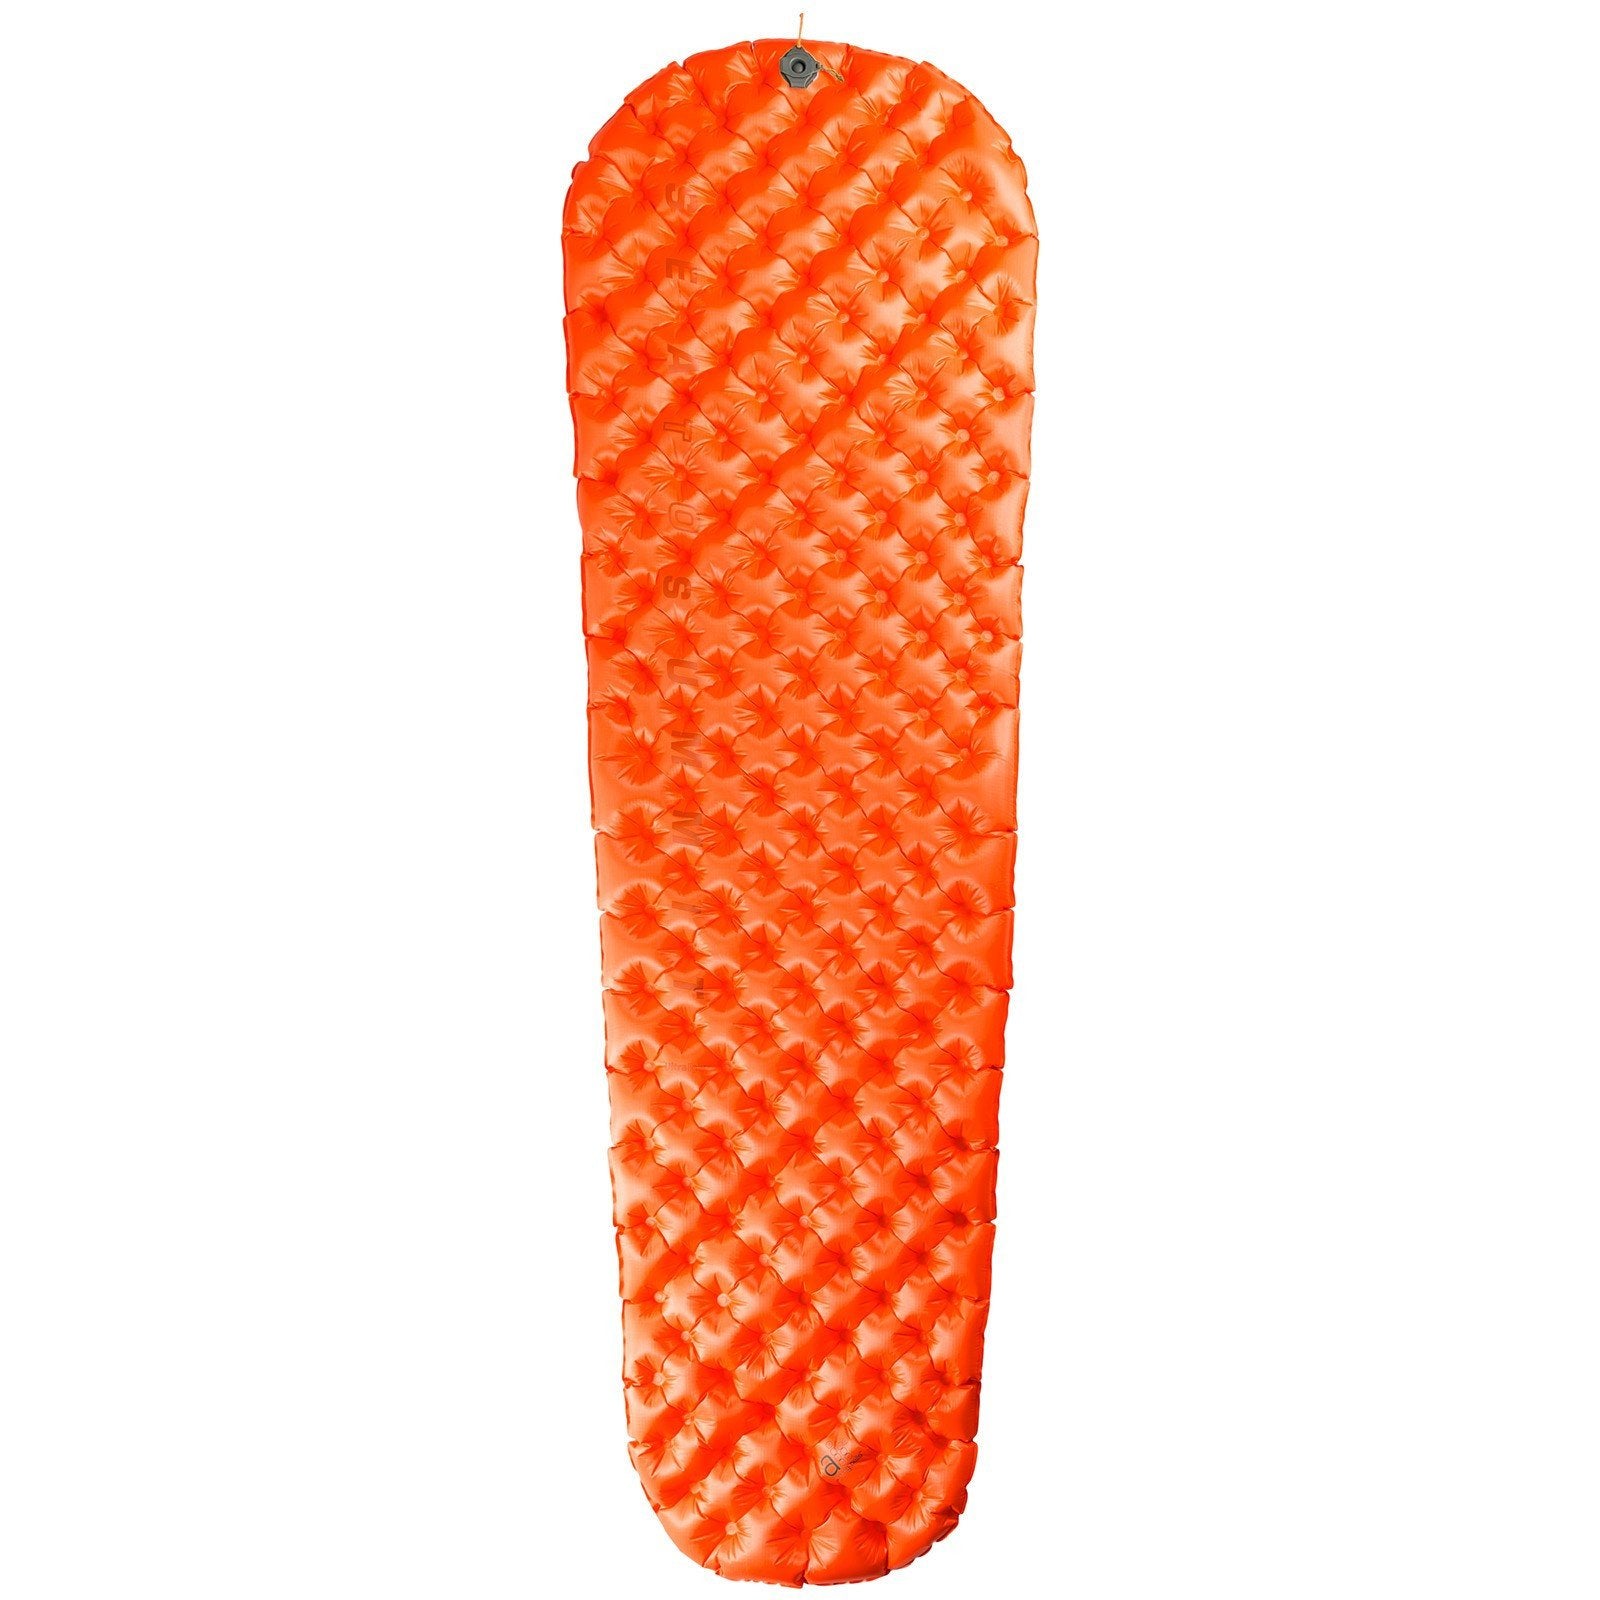 Sea to Summit UltraLight Insulated sleeping mat, shown inflated and laid flat in orange colour